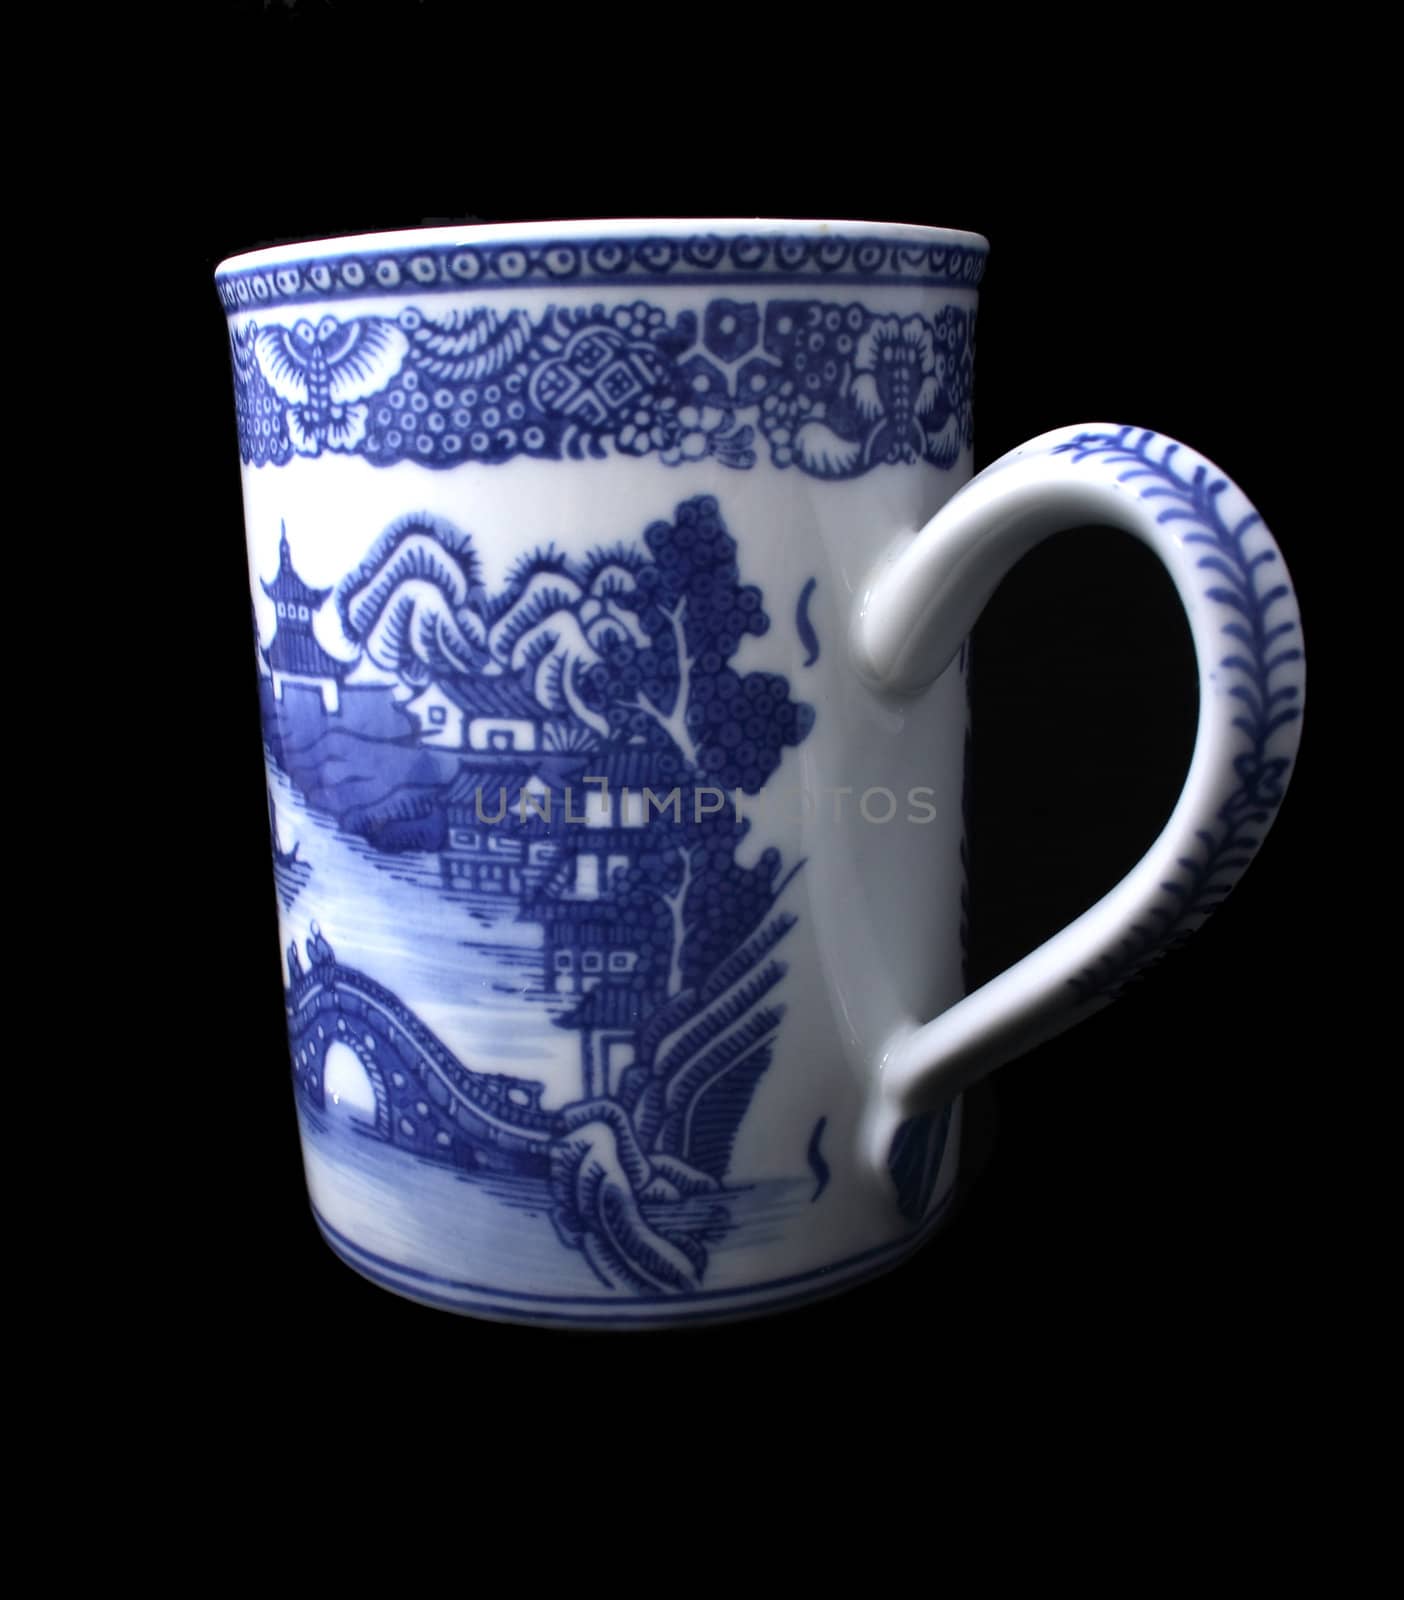 A Chinese Style Cup on black background.